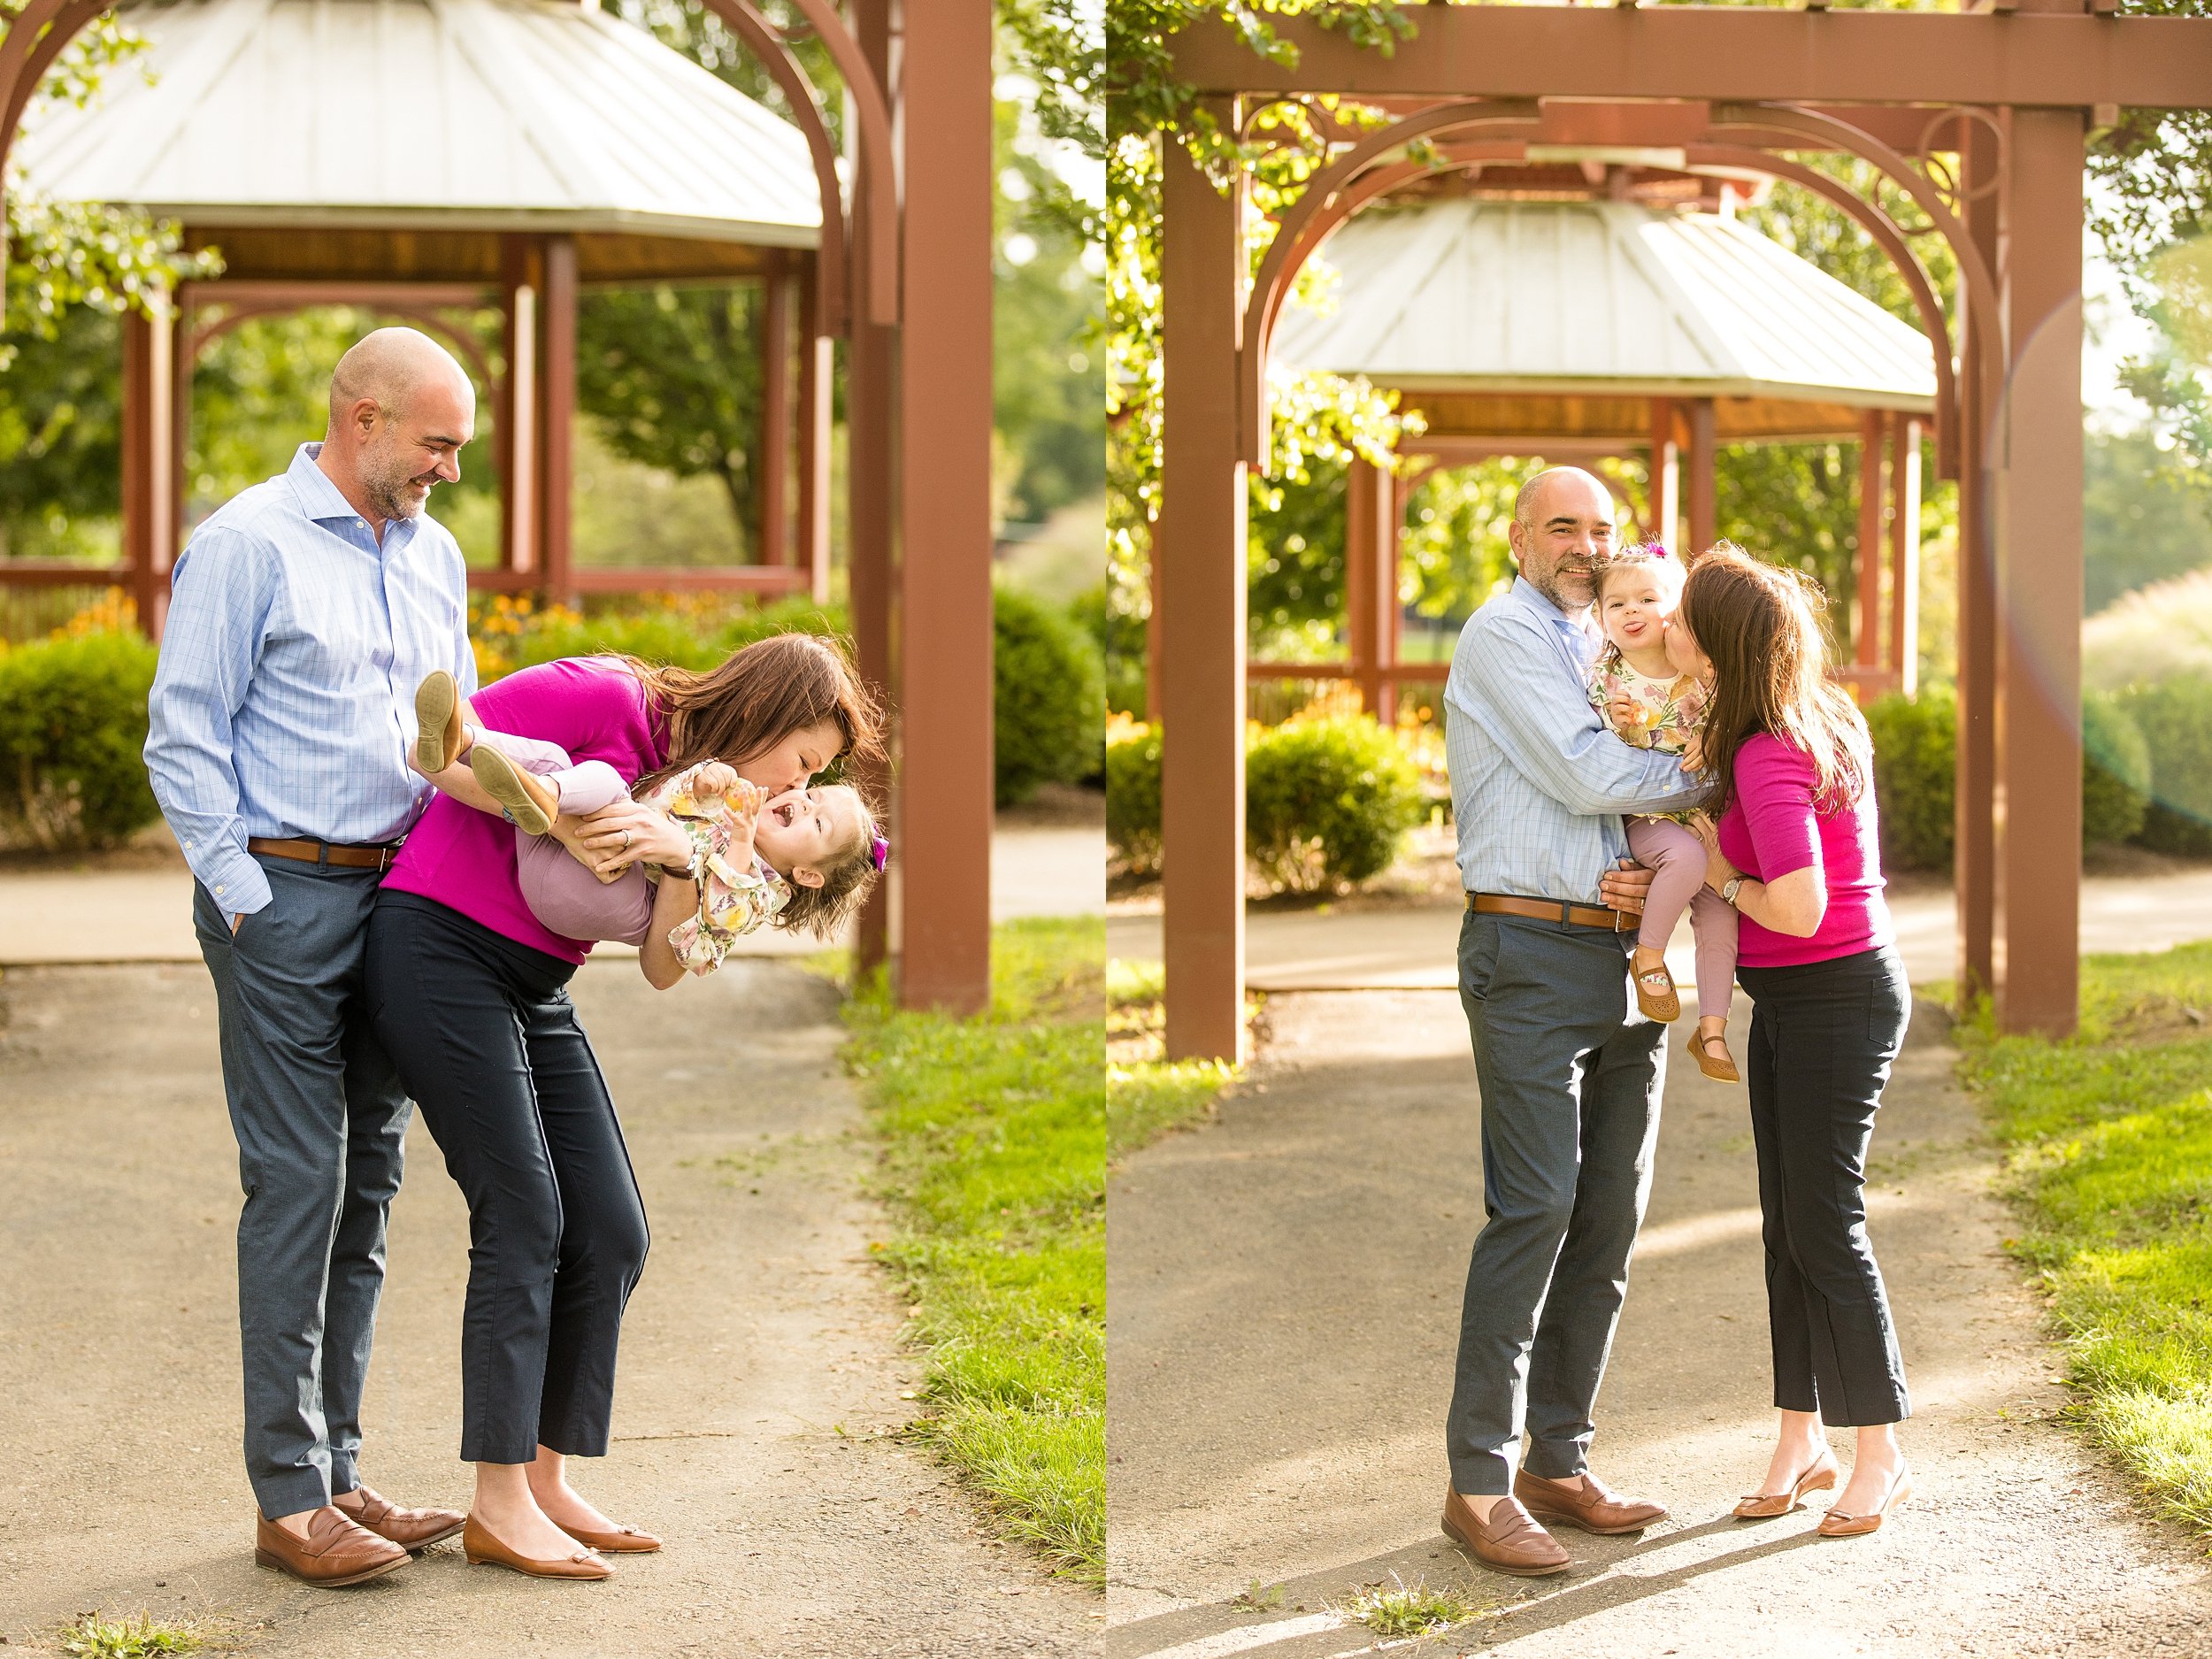 pittsburgh family photographer, monroeville community park family photos, cranberry township family photographer, zelienople family photographer